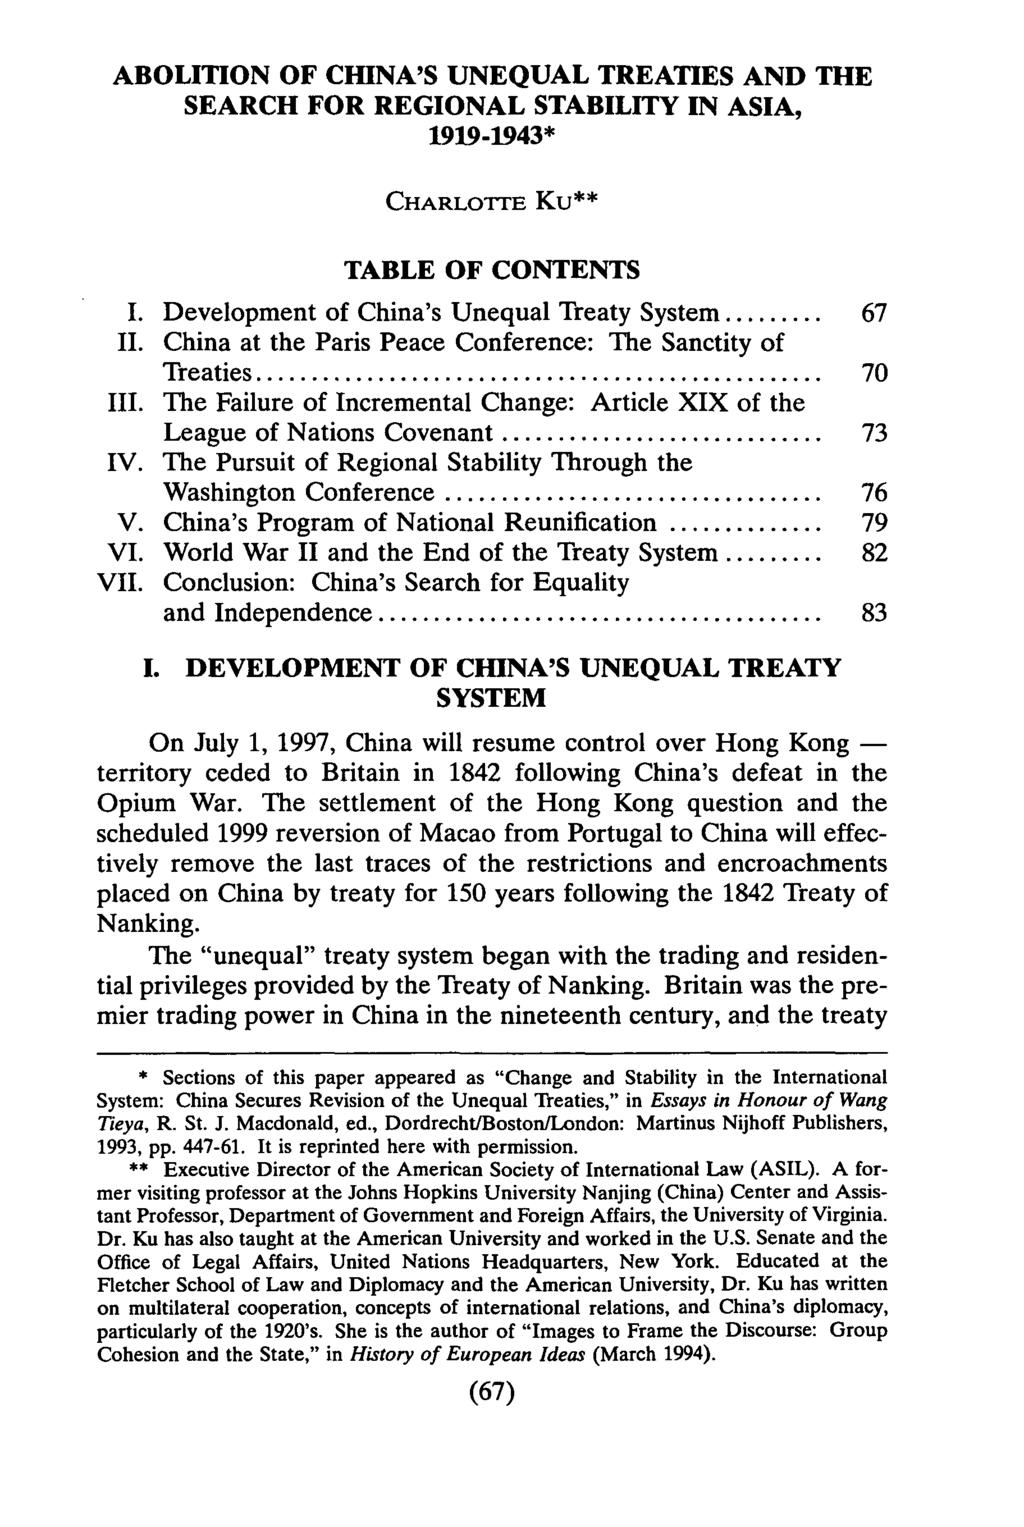 ABOLITION OF CHINA'S UNEQUAL TREATIES AND THE SEARCH FOR REGIONAL STABILITY IN ASIA, 1919-1943* CHARLOTTE Ku** TABLE OF CONTENTS I. Development of China's Unequal Treaty System... 67 II.